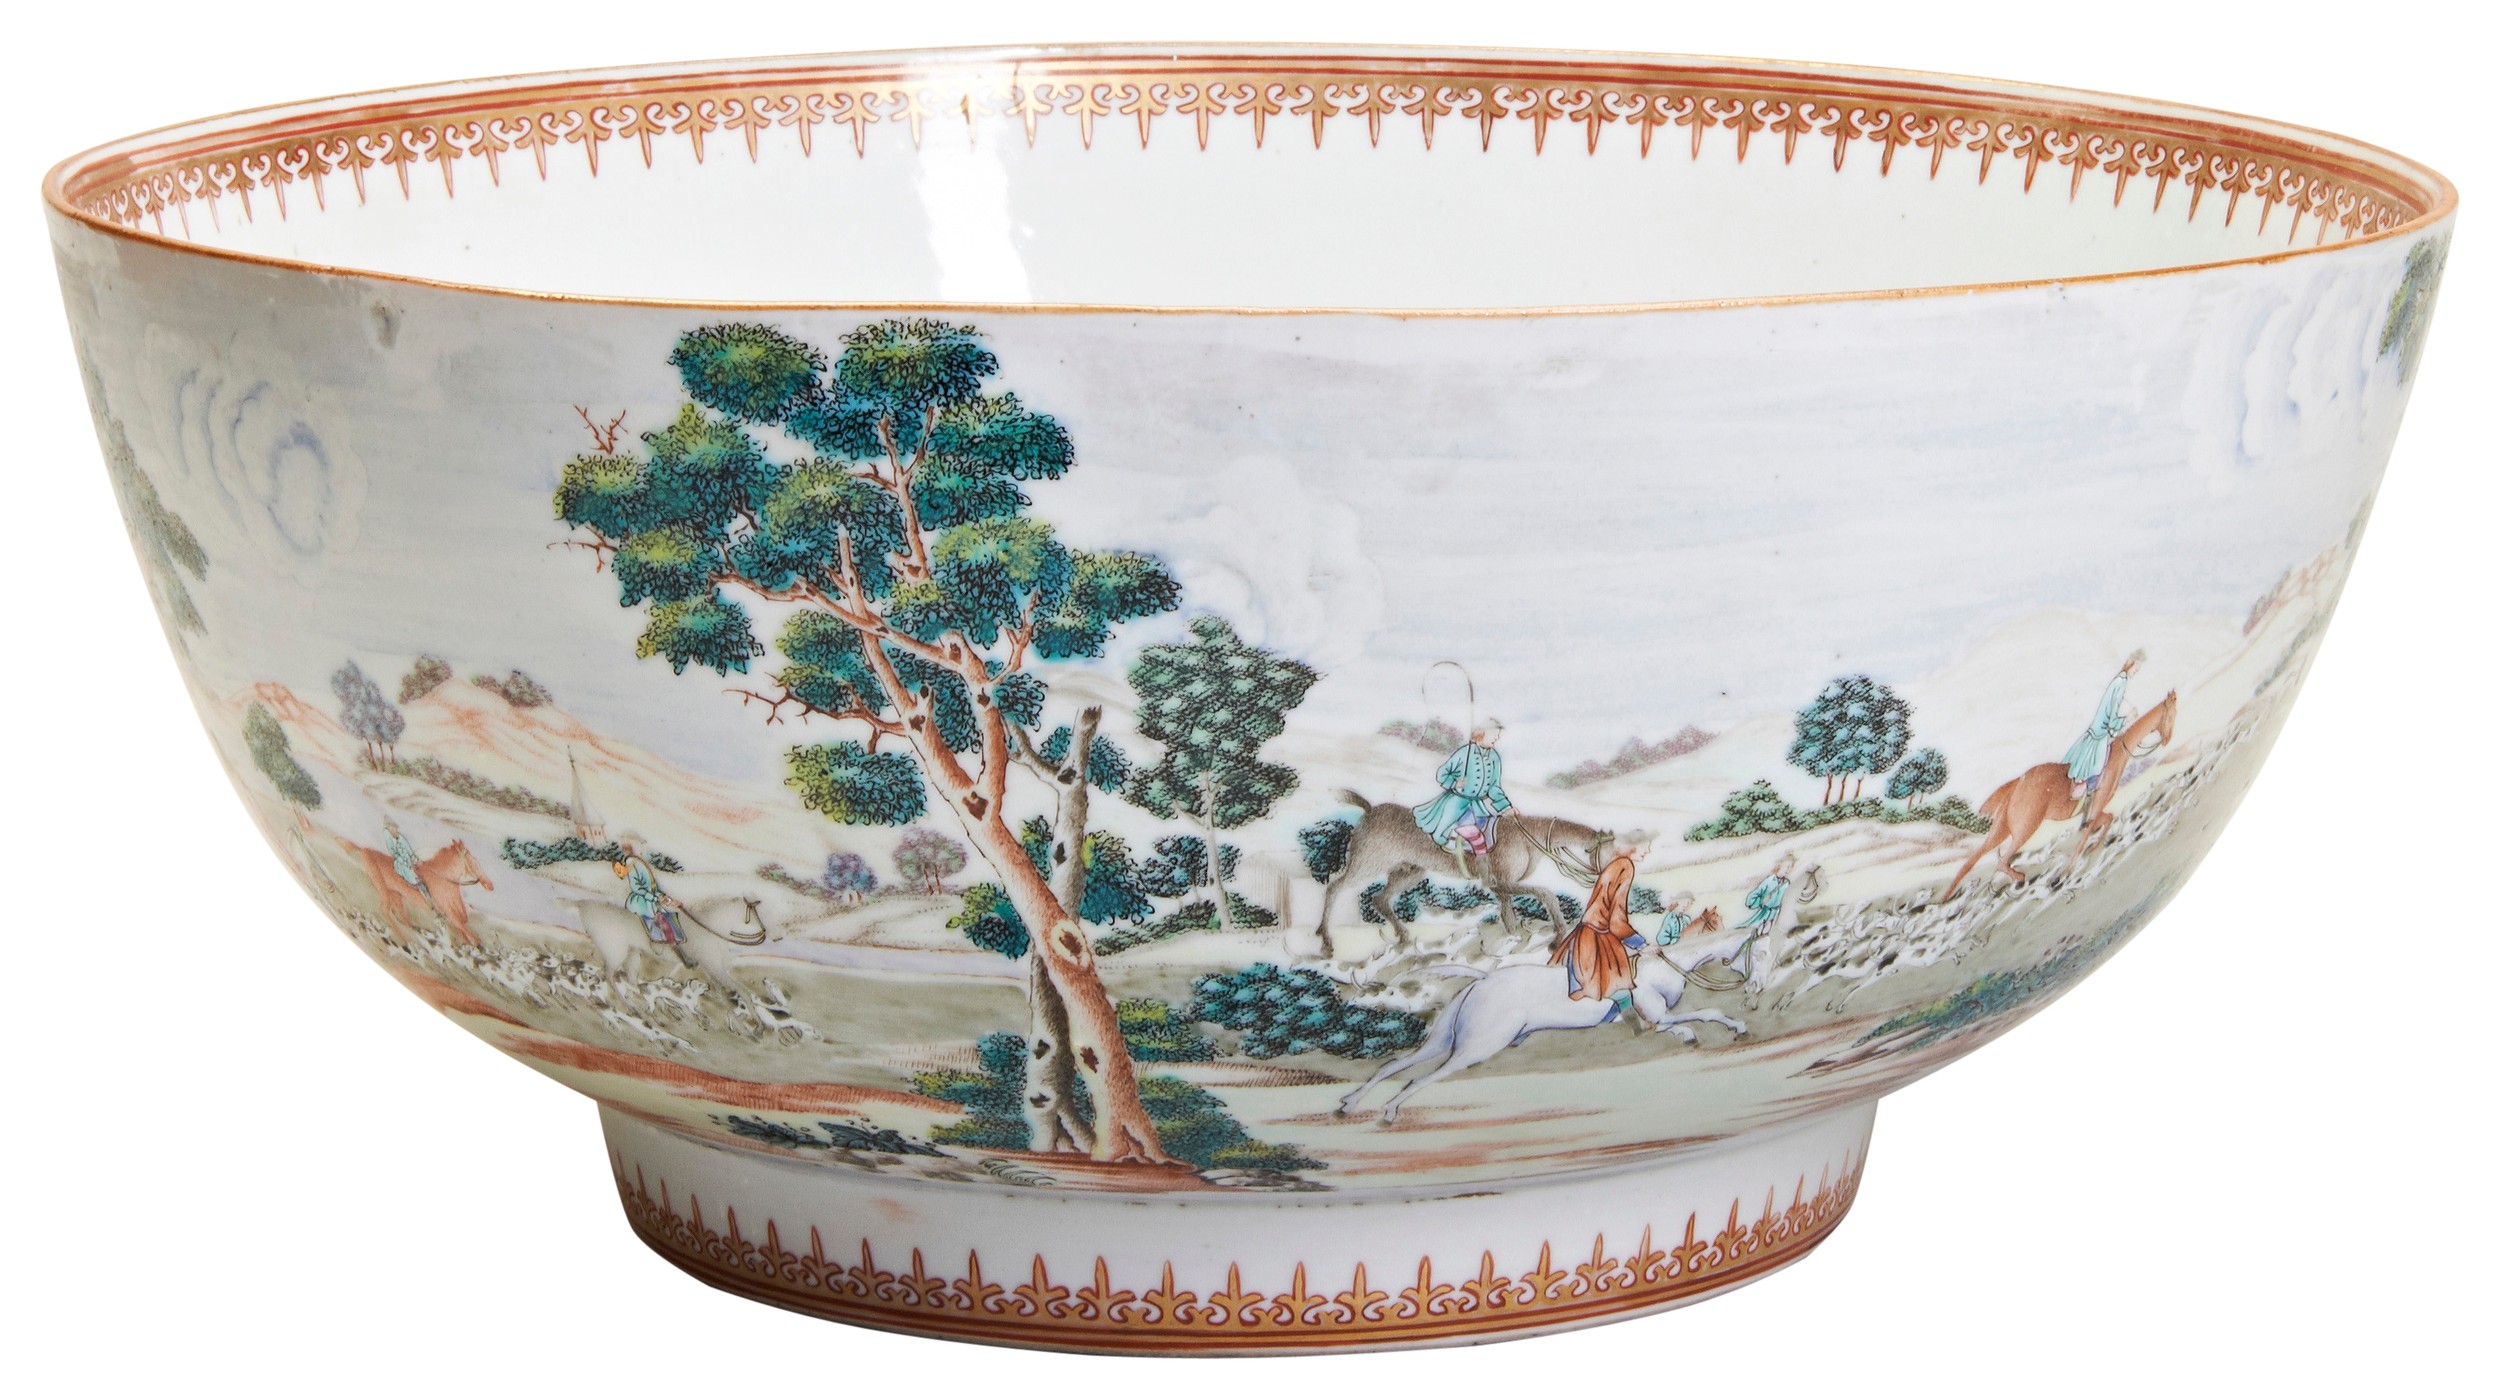 A LARGE CHINESE EXPORT 'HUNTING SUBJECT' BOWL QIANLONG PERIOD (1736-1795) the exterior painted - Image 3 of 4